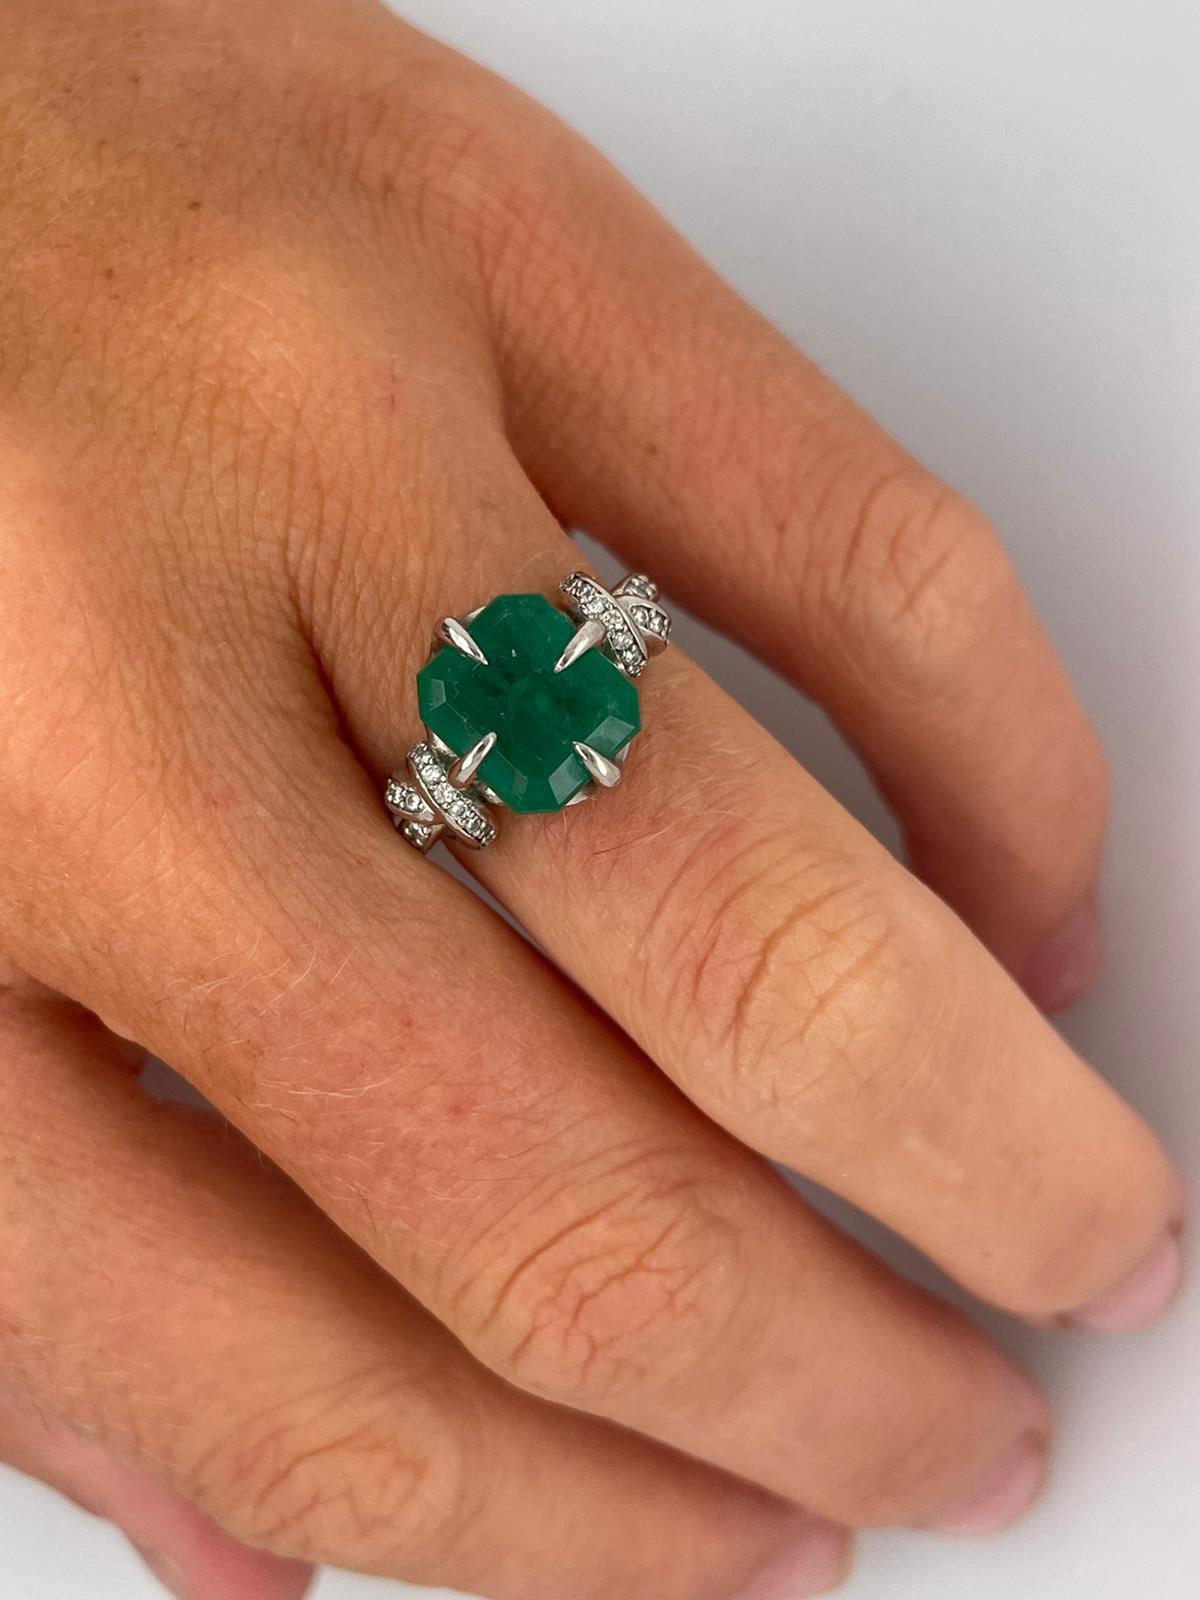 For Sale:  4ct Emerald solitaire in platinum with diamond knots  5